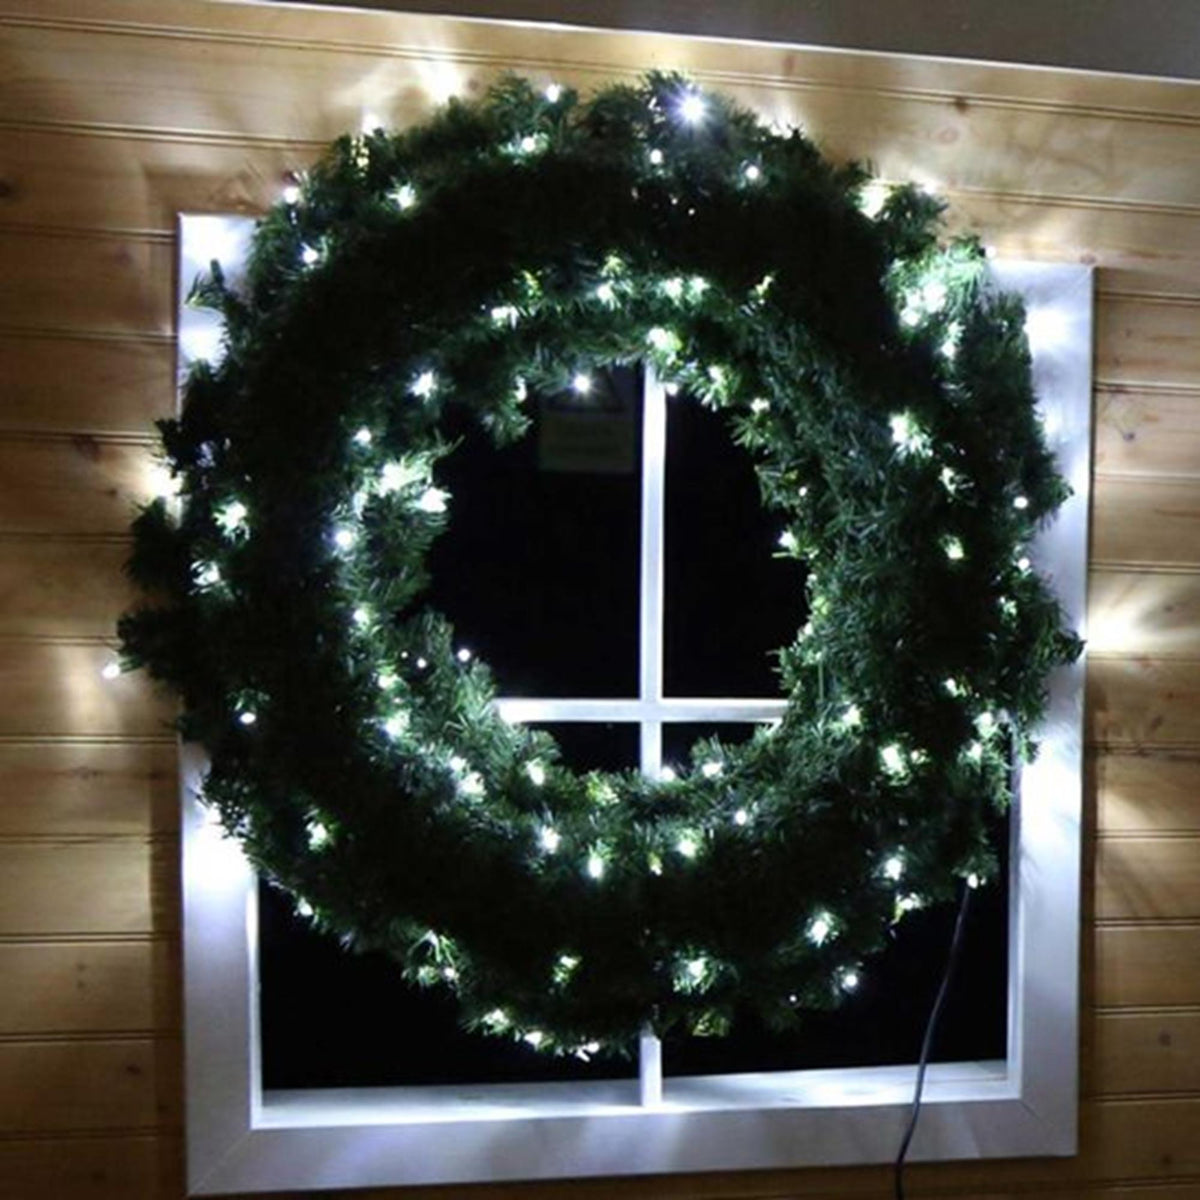 1.1m Giant XP Connectable Commercial Wreath Lit with 120 Ice White LEDs